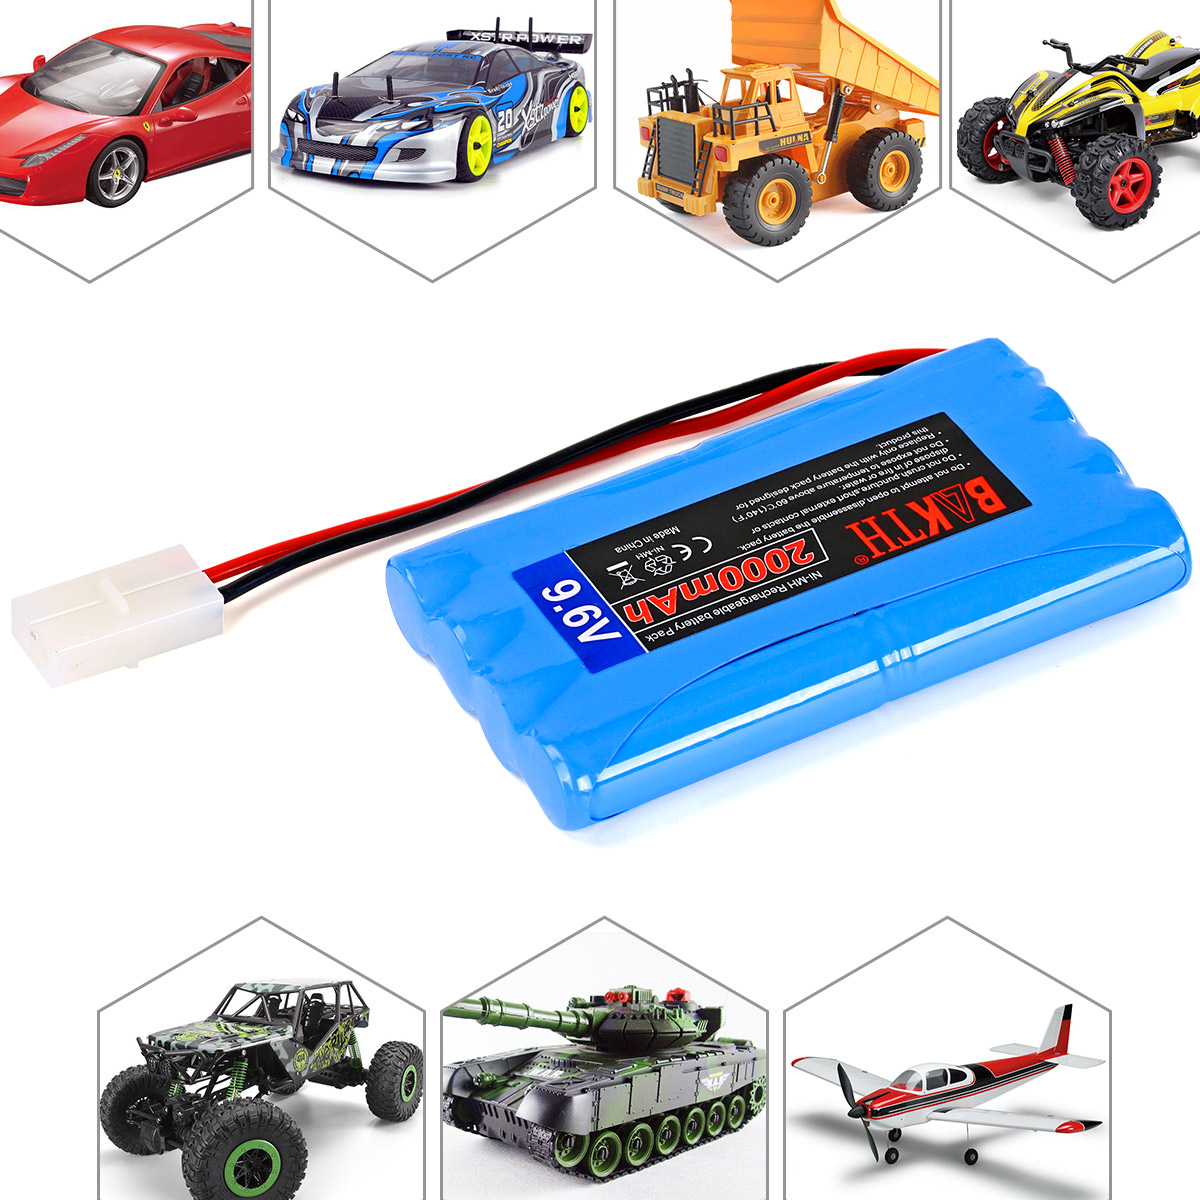 BAKTH 4000mAh 7.2V NiMH Battery with KET Connector for RC toys